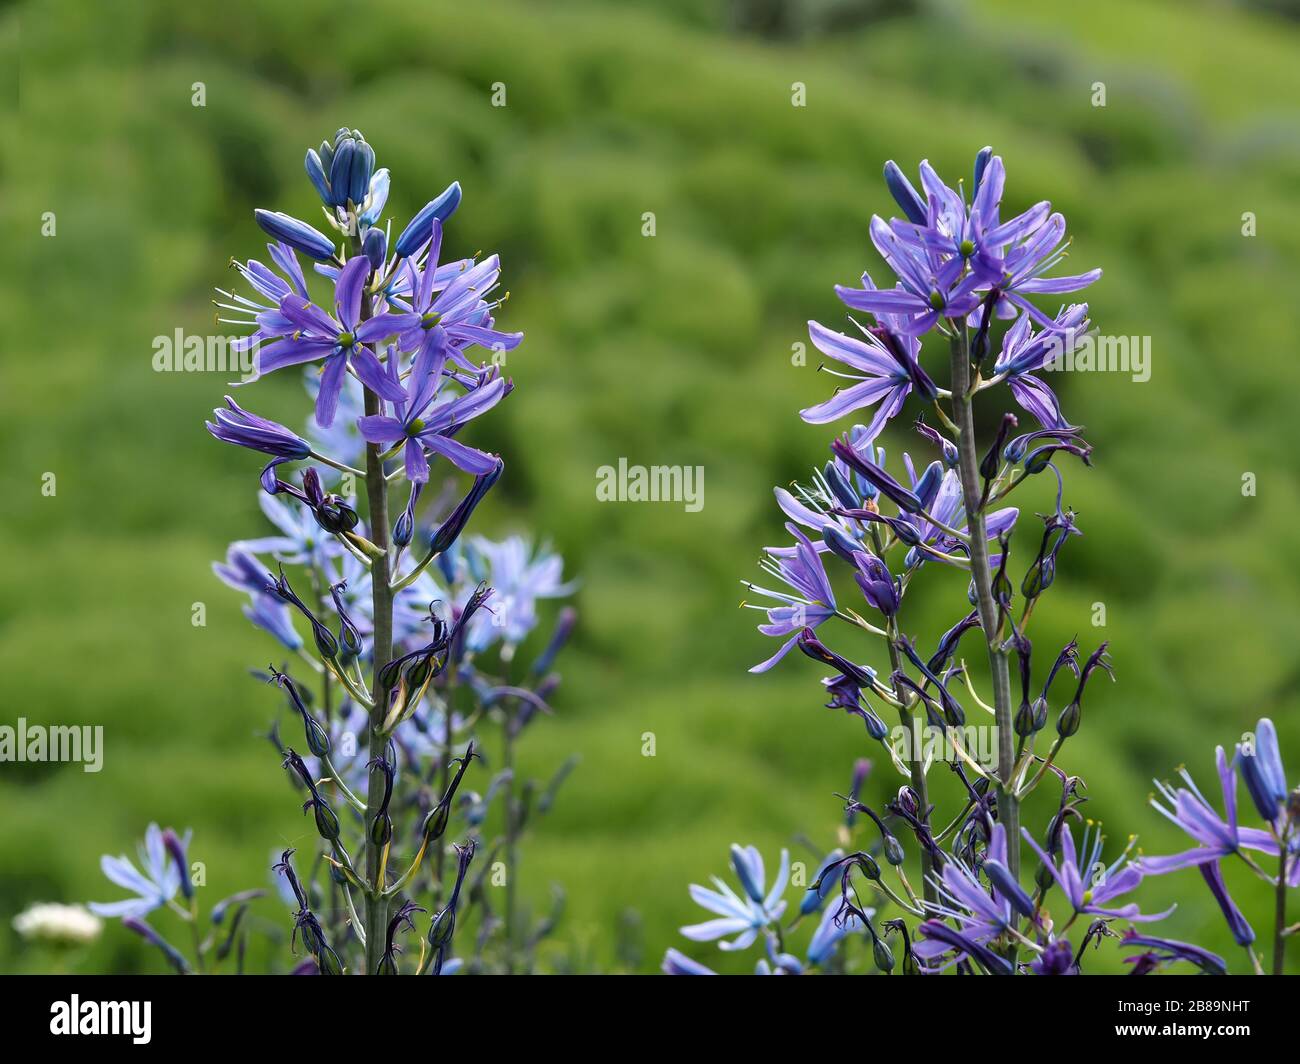 Closeup of a flower spike of Camassia with buds, mauve flaers and finished flowers Stock Photo